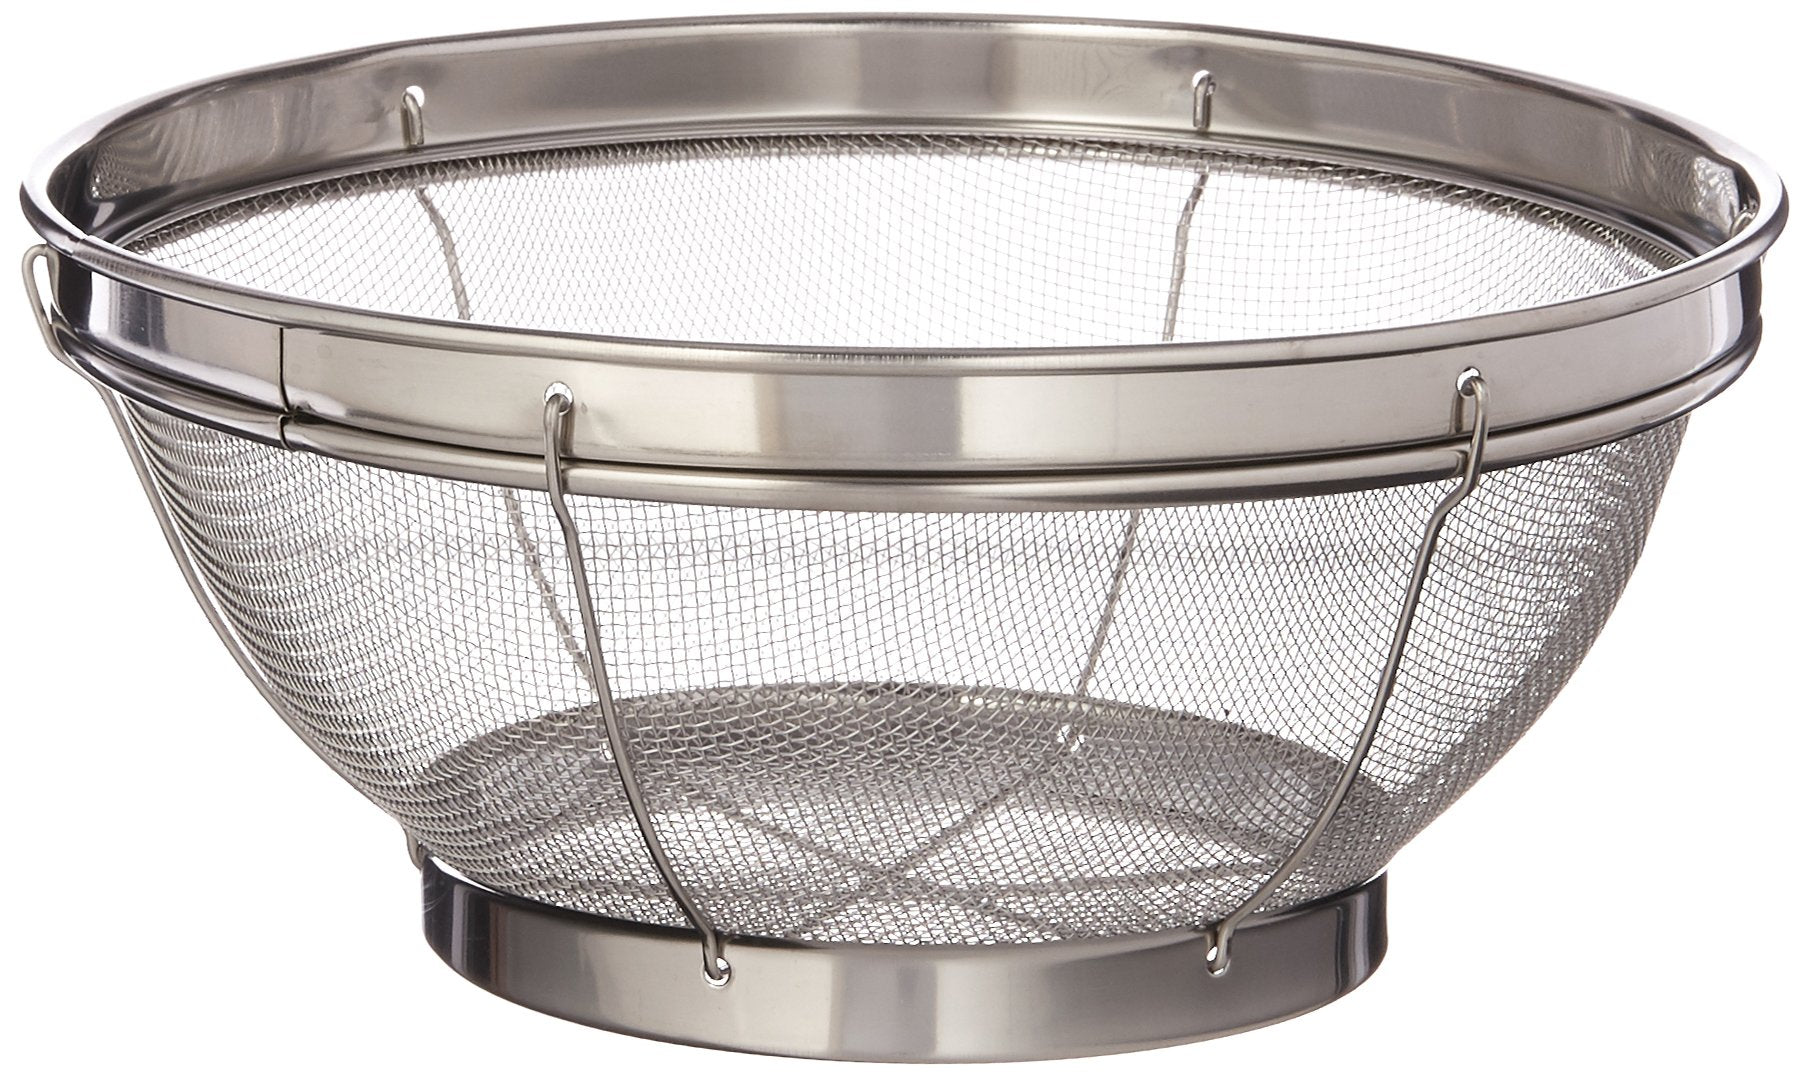 Norpro Stainless Steel 7-1/2-Inch Mesh Colander, 3.5 x 7.5 x 7.5 inches, Silver  - Like New